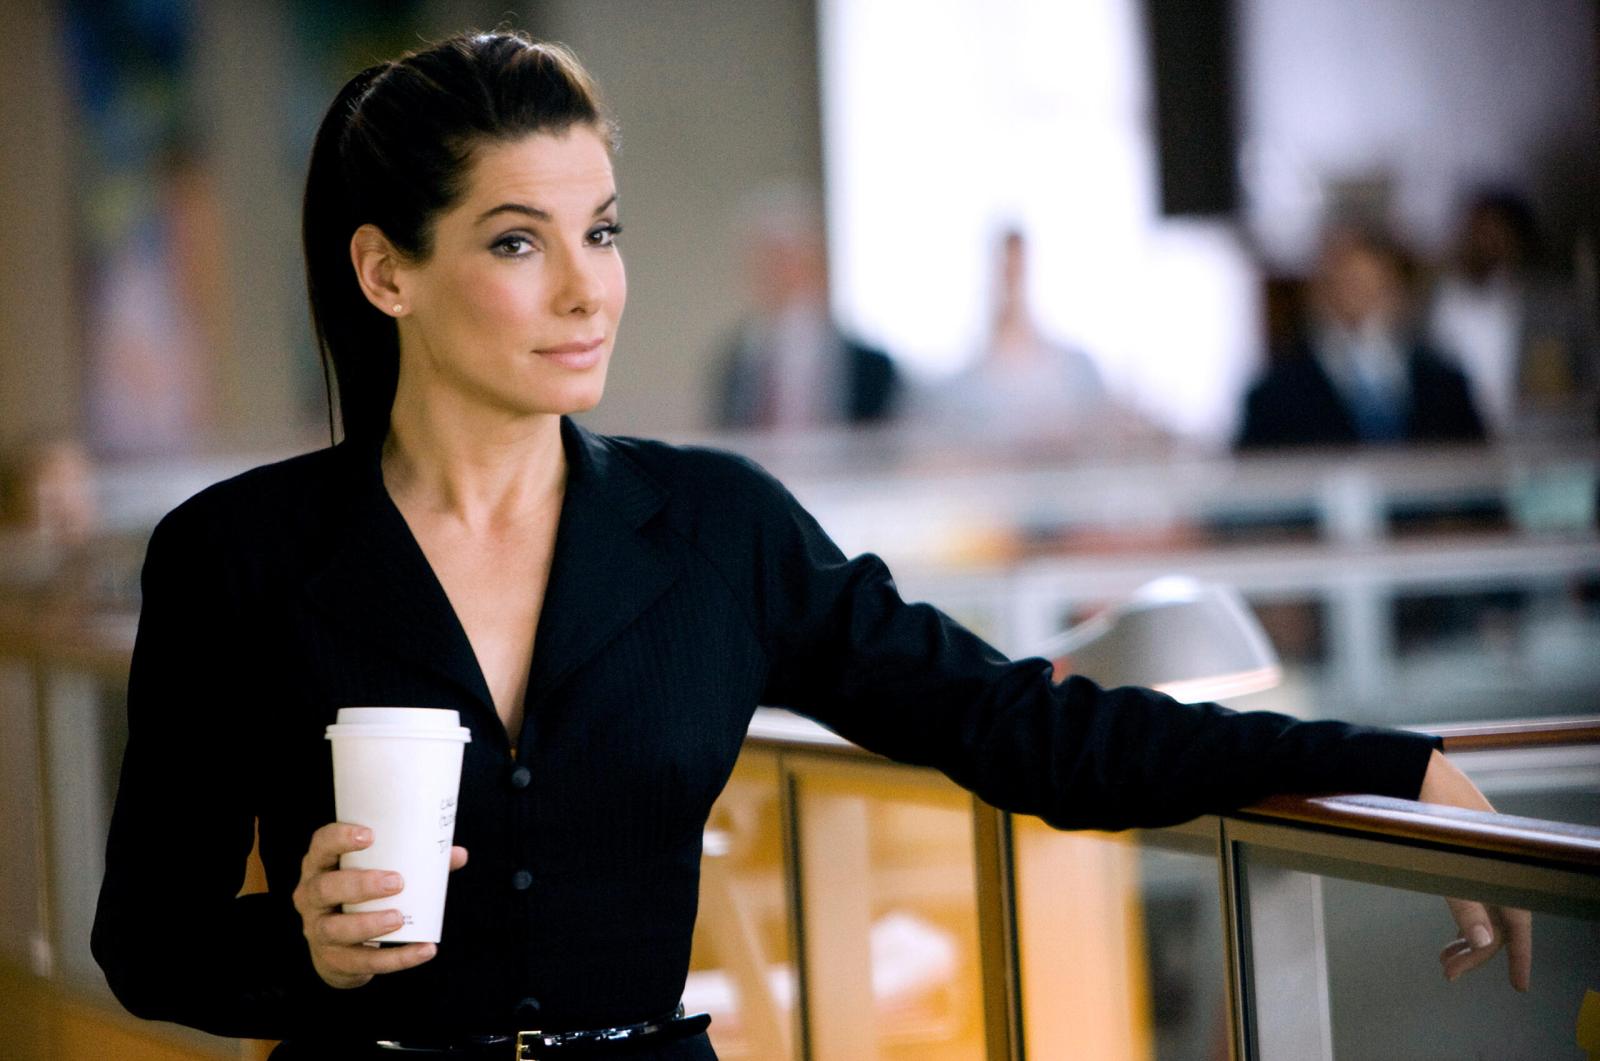 Sandra Bullock Agreed to Get Naked in Proposal For The Most Bizarre Reason Possible - image 1